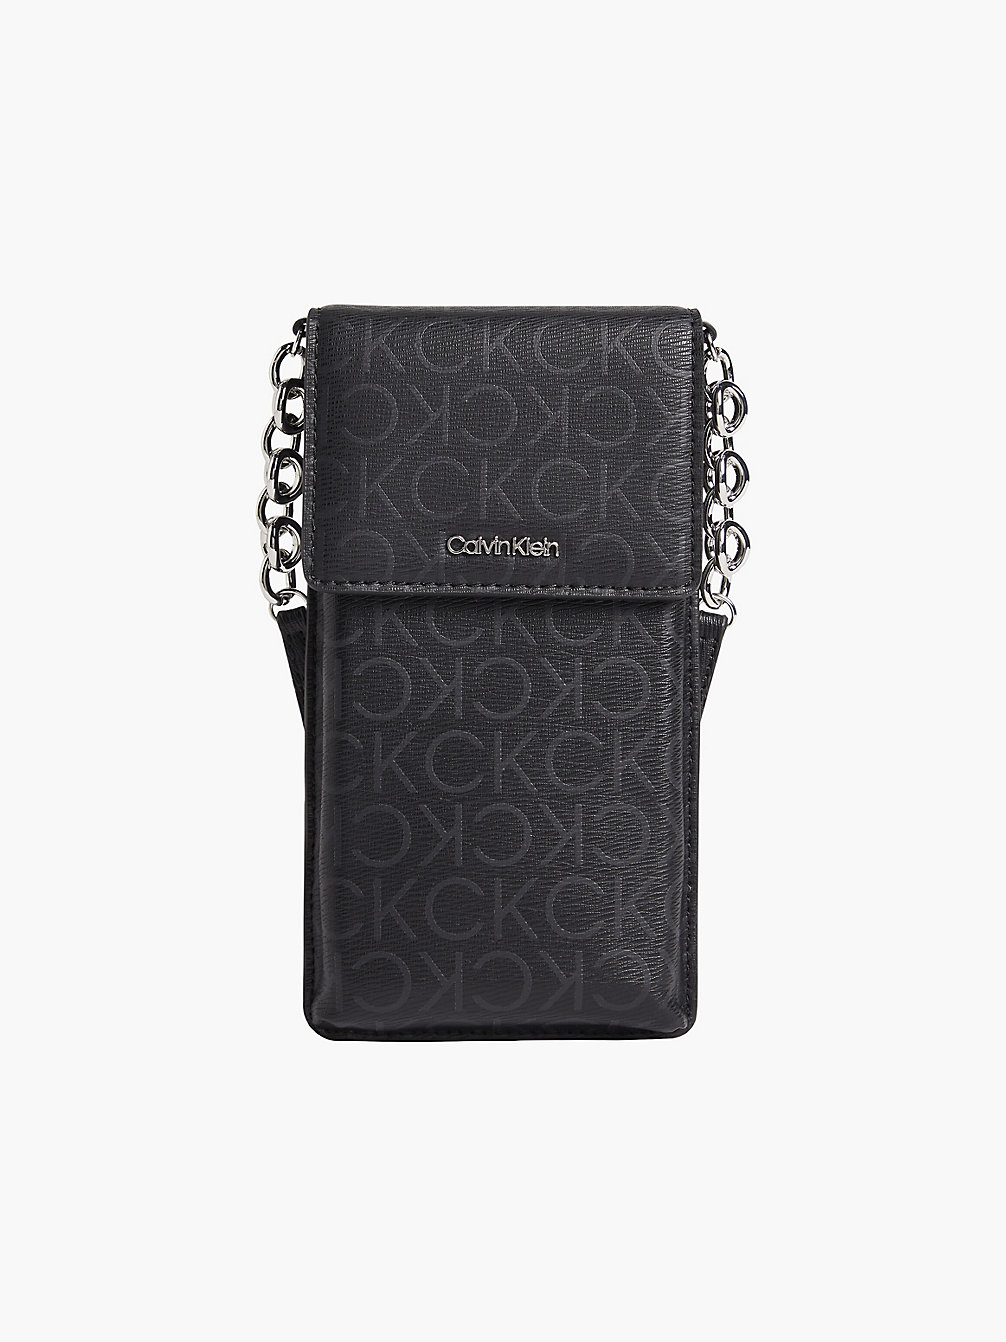 BLACK MONO Recycled Crossbody Phone Pouch undefined women Calvin Klein